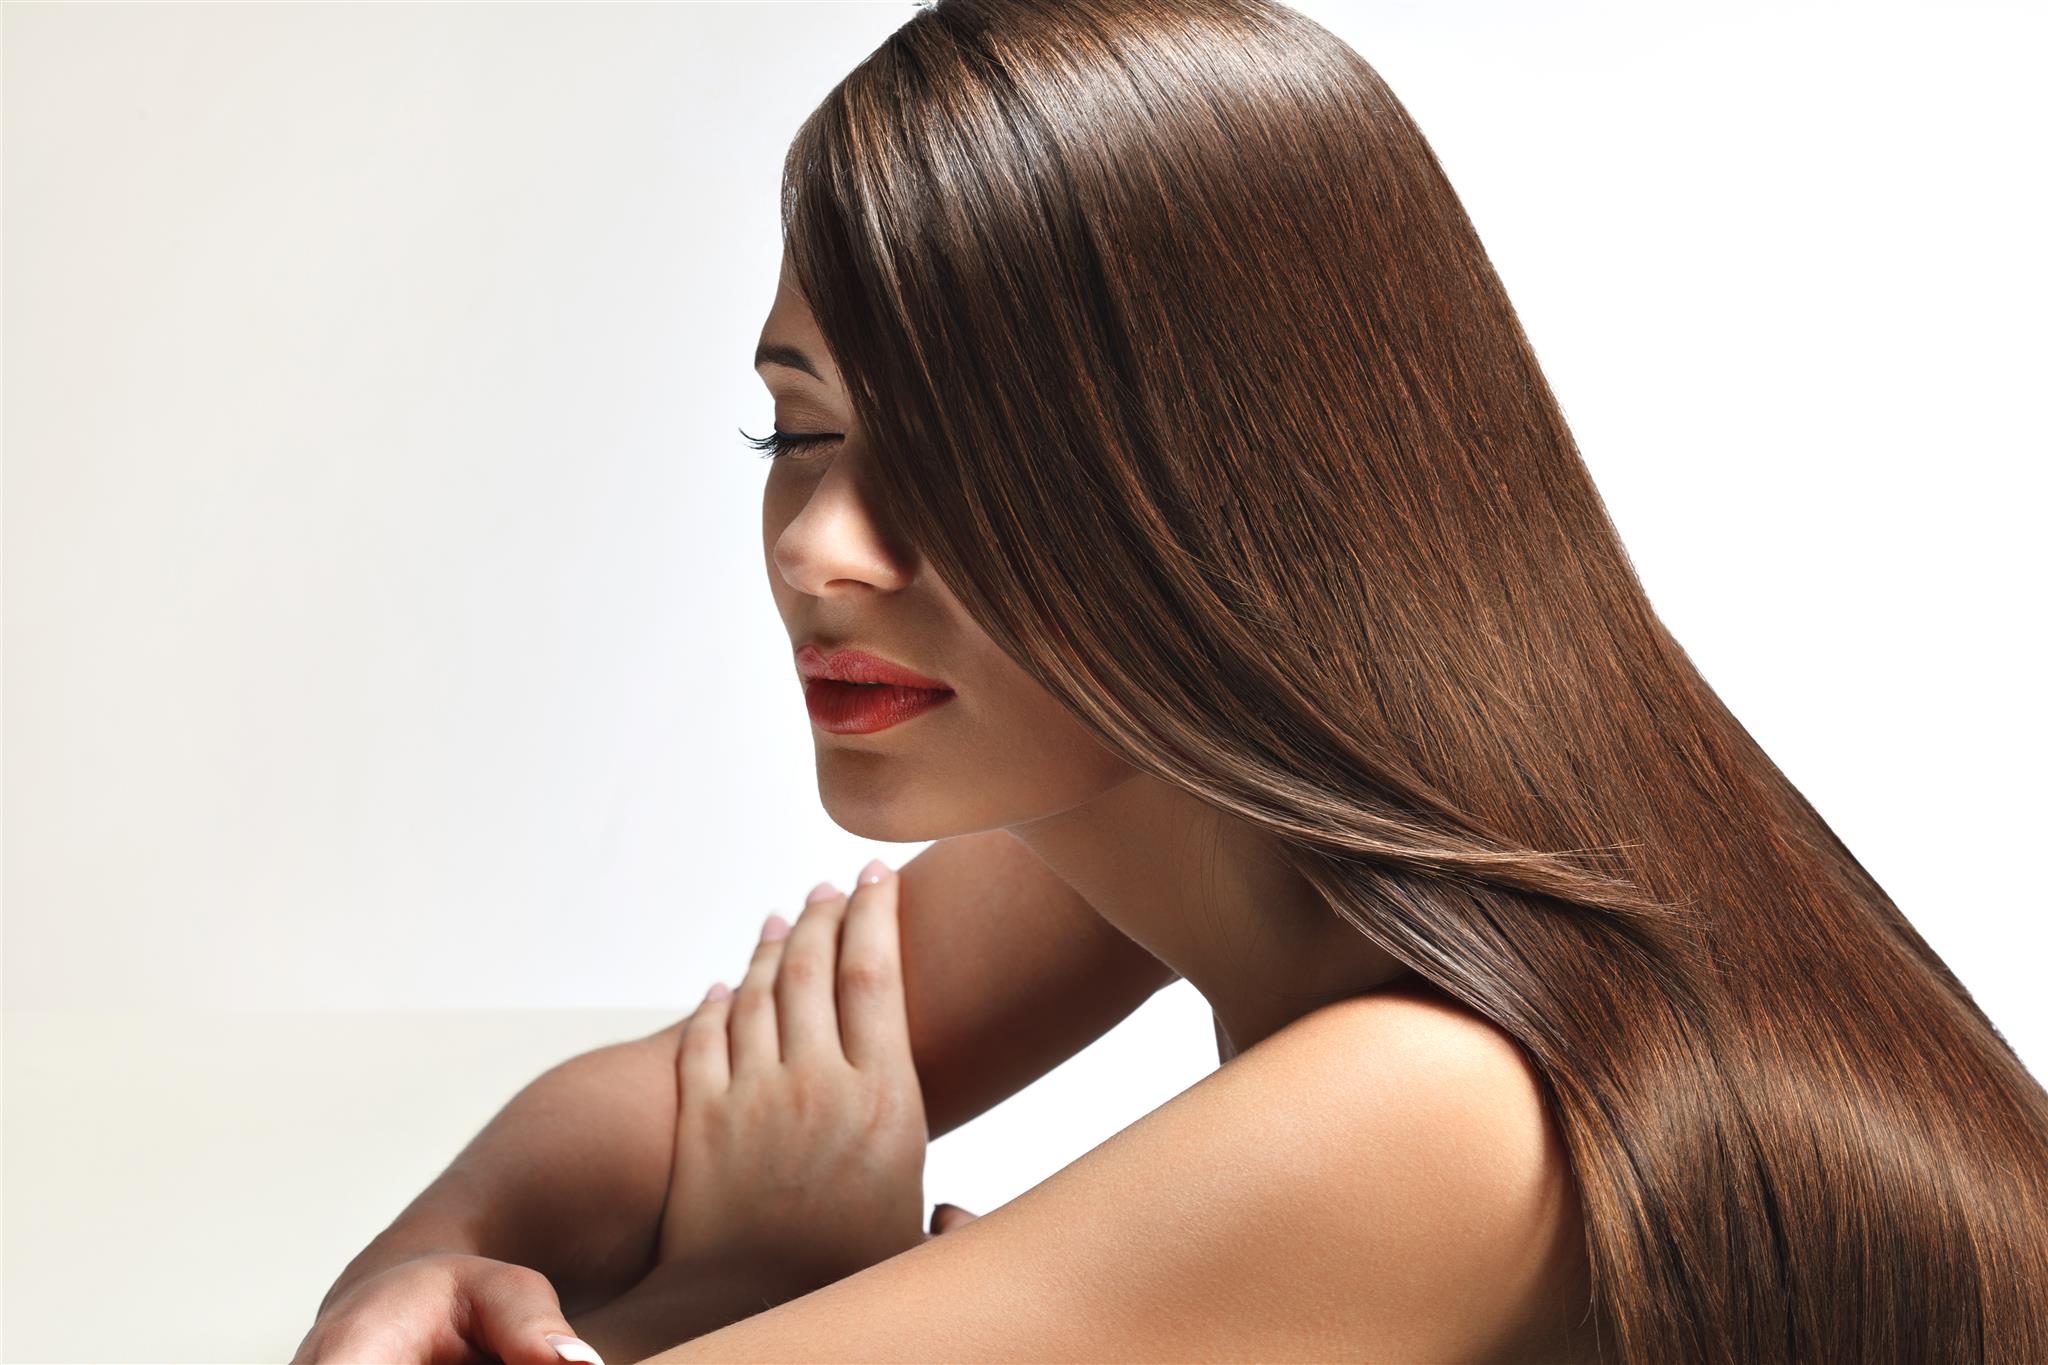 5 Simple Ways To Achieve Lustrous, Shiny Hair